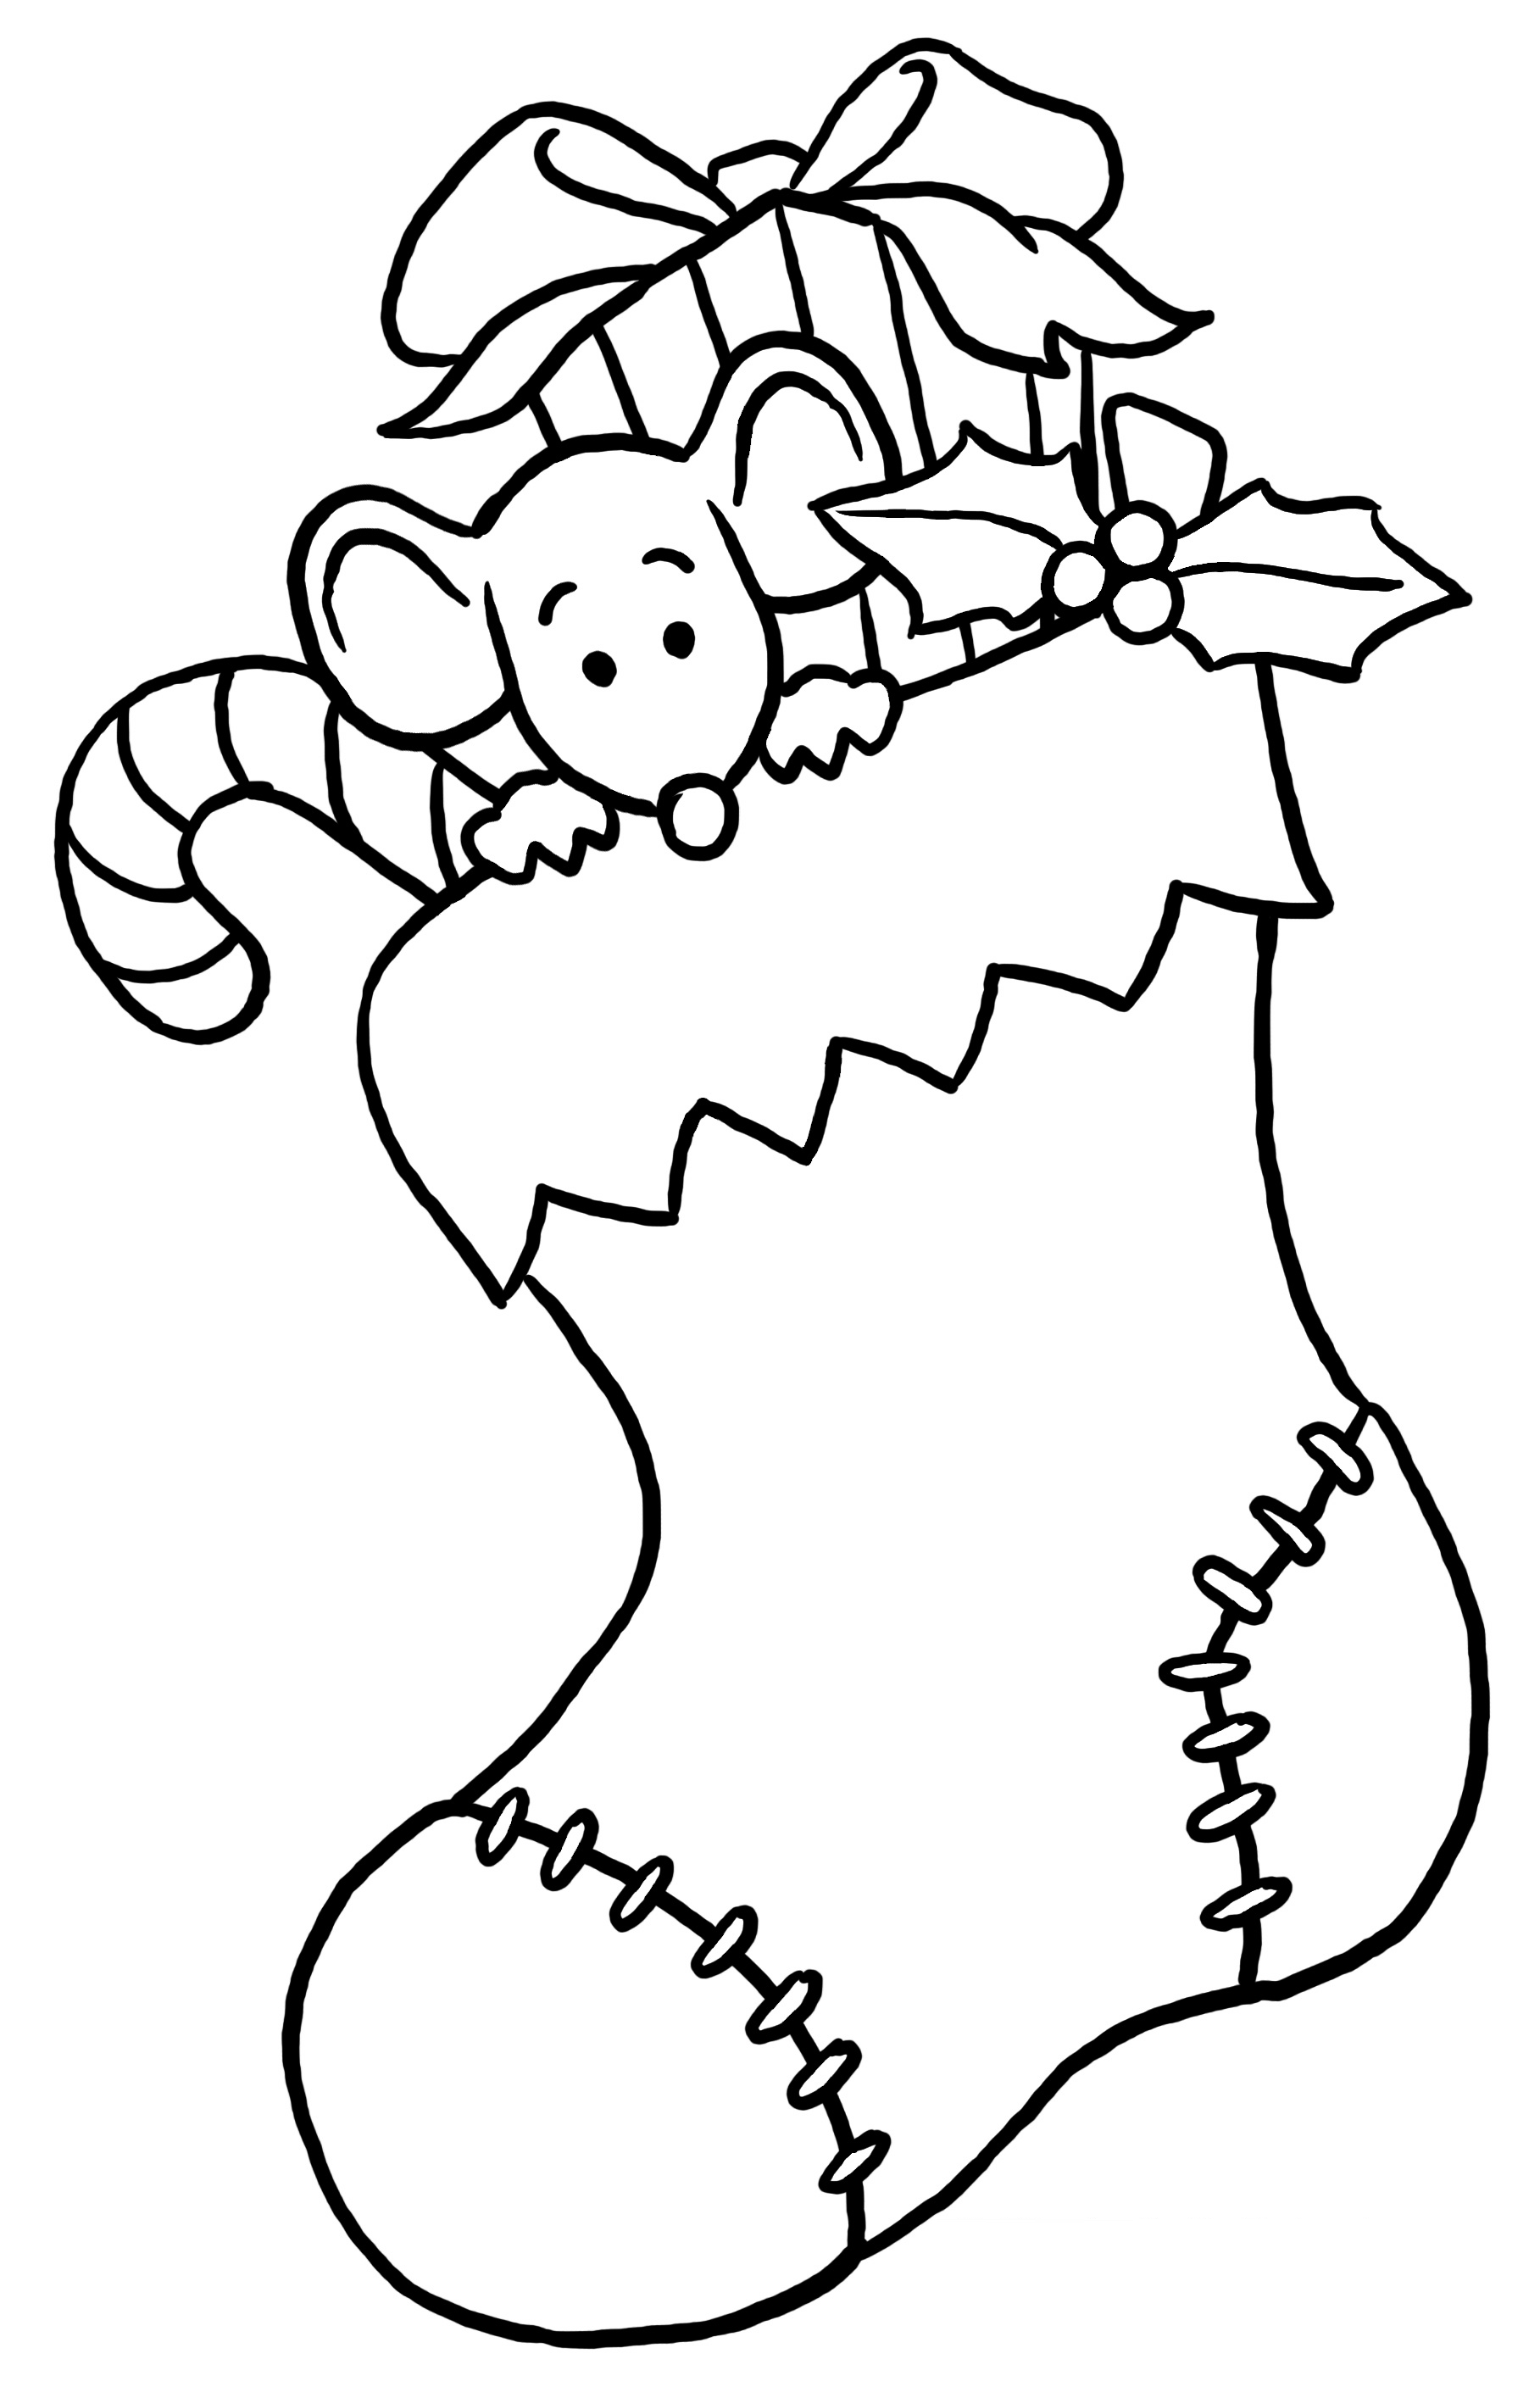 Christmas Coloring Pages Online Printable - Coloring Pages For All ...